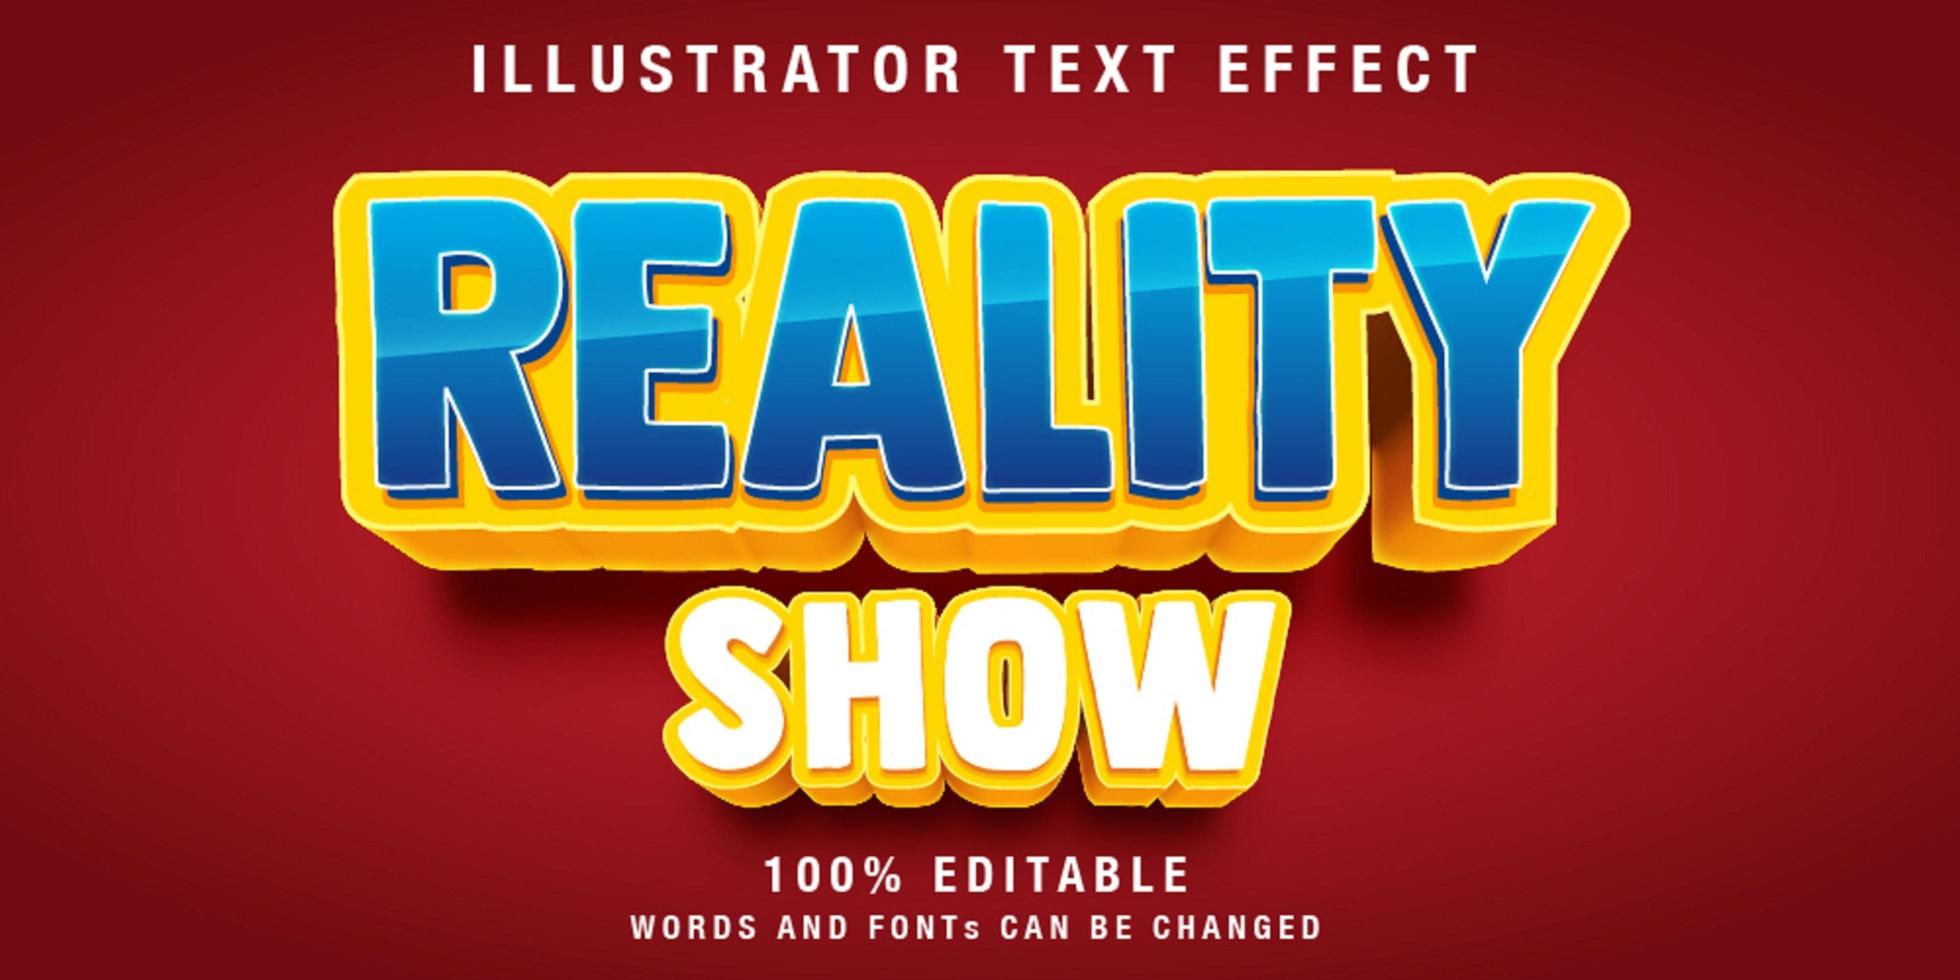 Editable text effect with yellow shadow vector